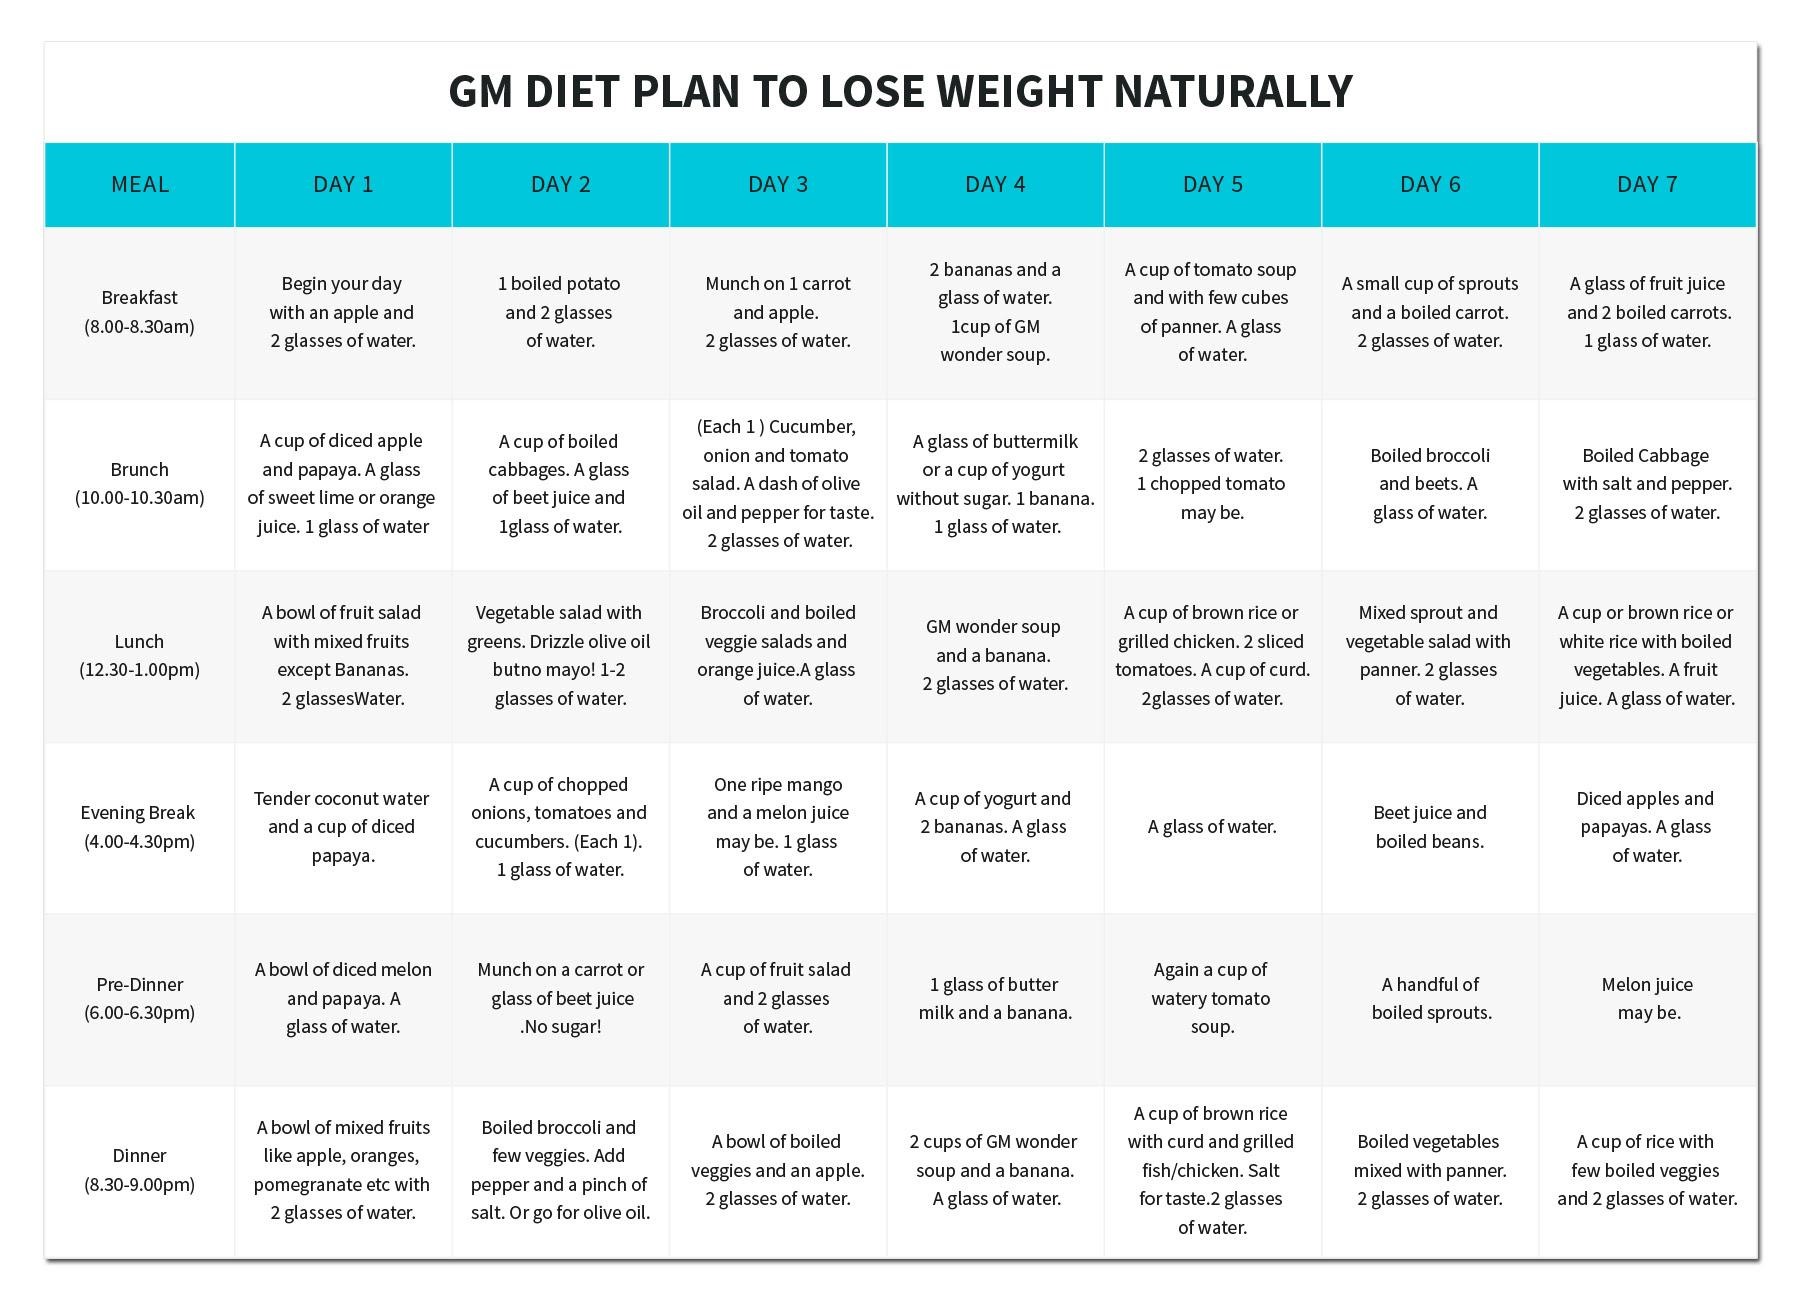 GM Diet Plan: An Effective Way To Lose Weight - WorthvieW